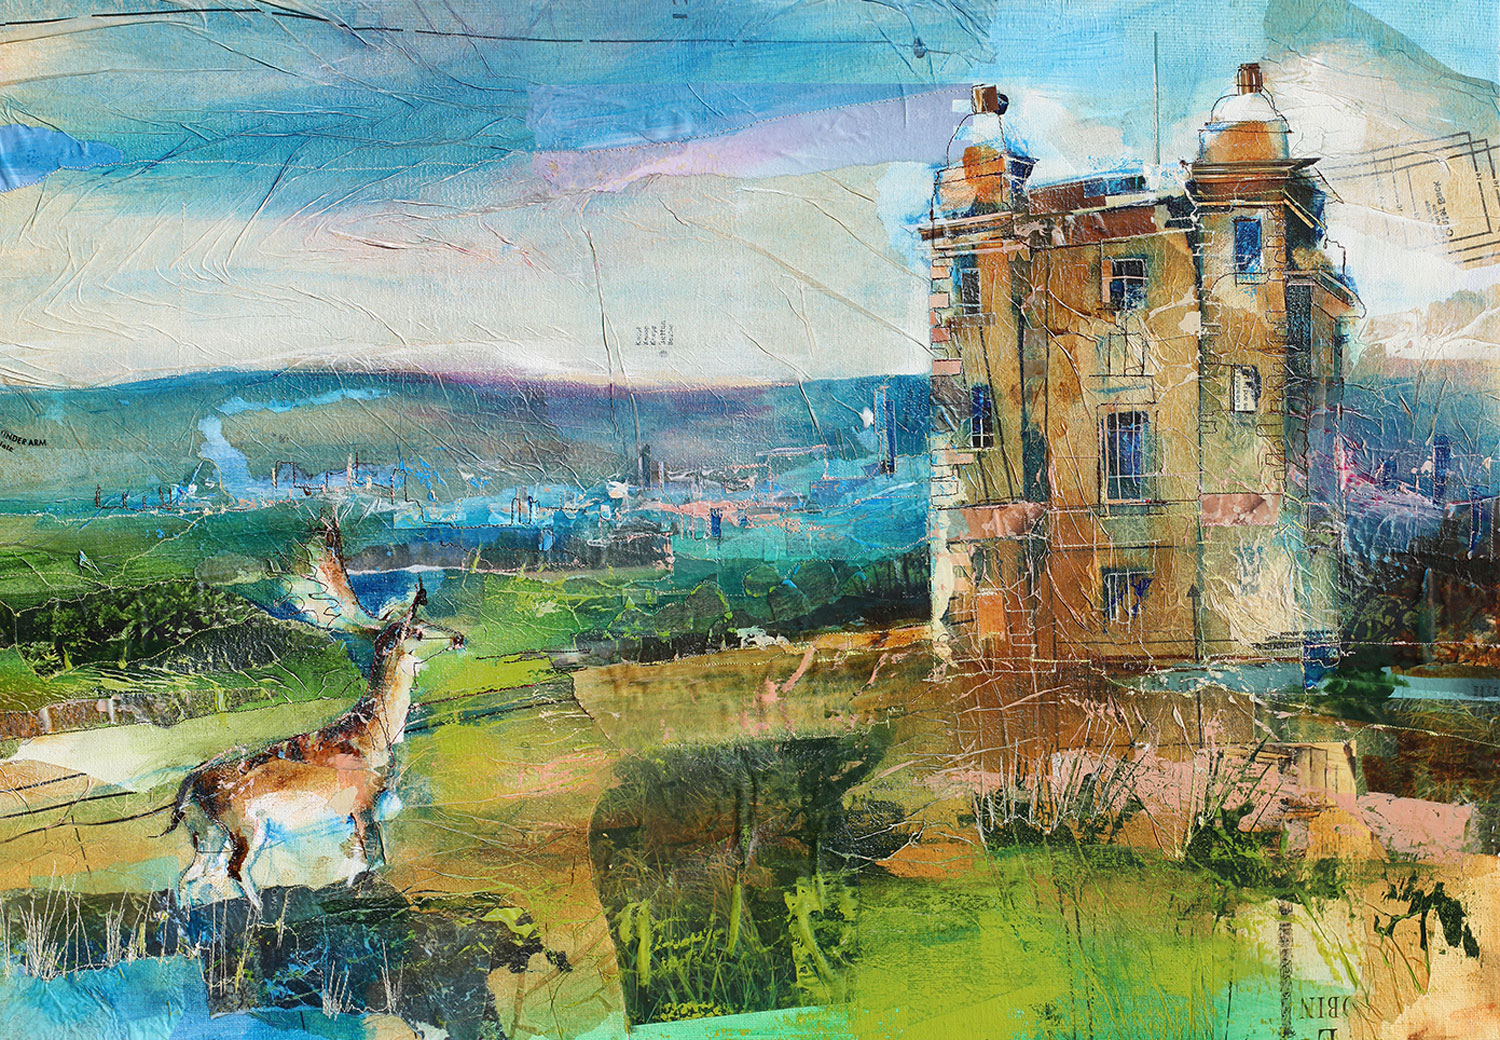 CAT No: 15 - ROB WILSON - THE CAGE, LYME PARK